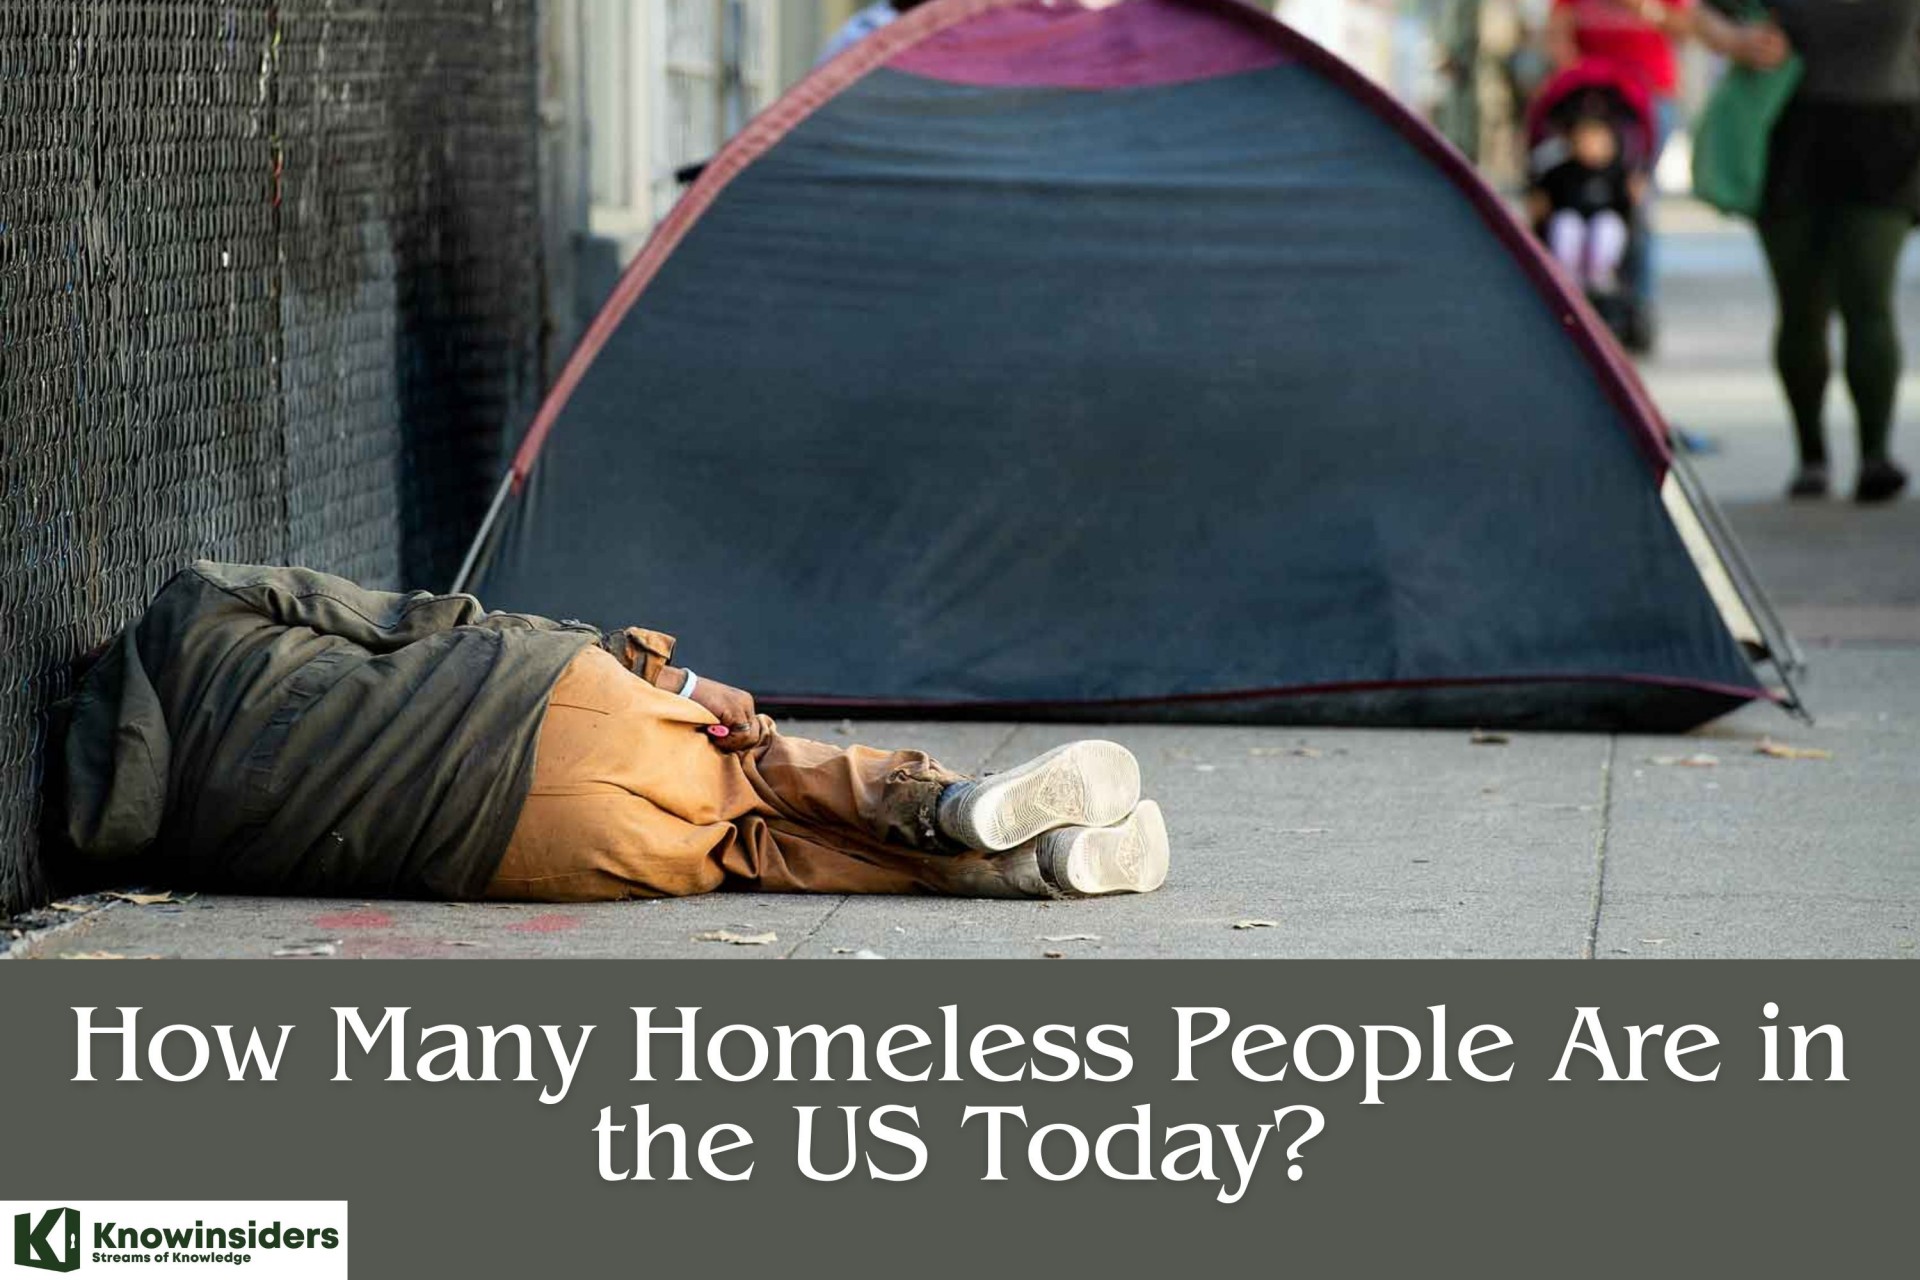 How Many Homeless People Are in the US Today?